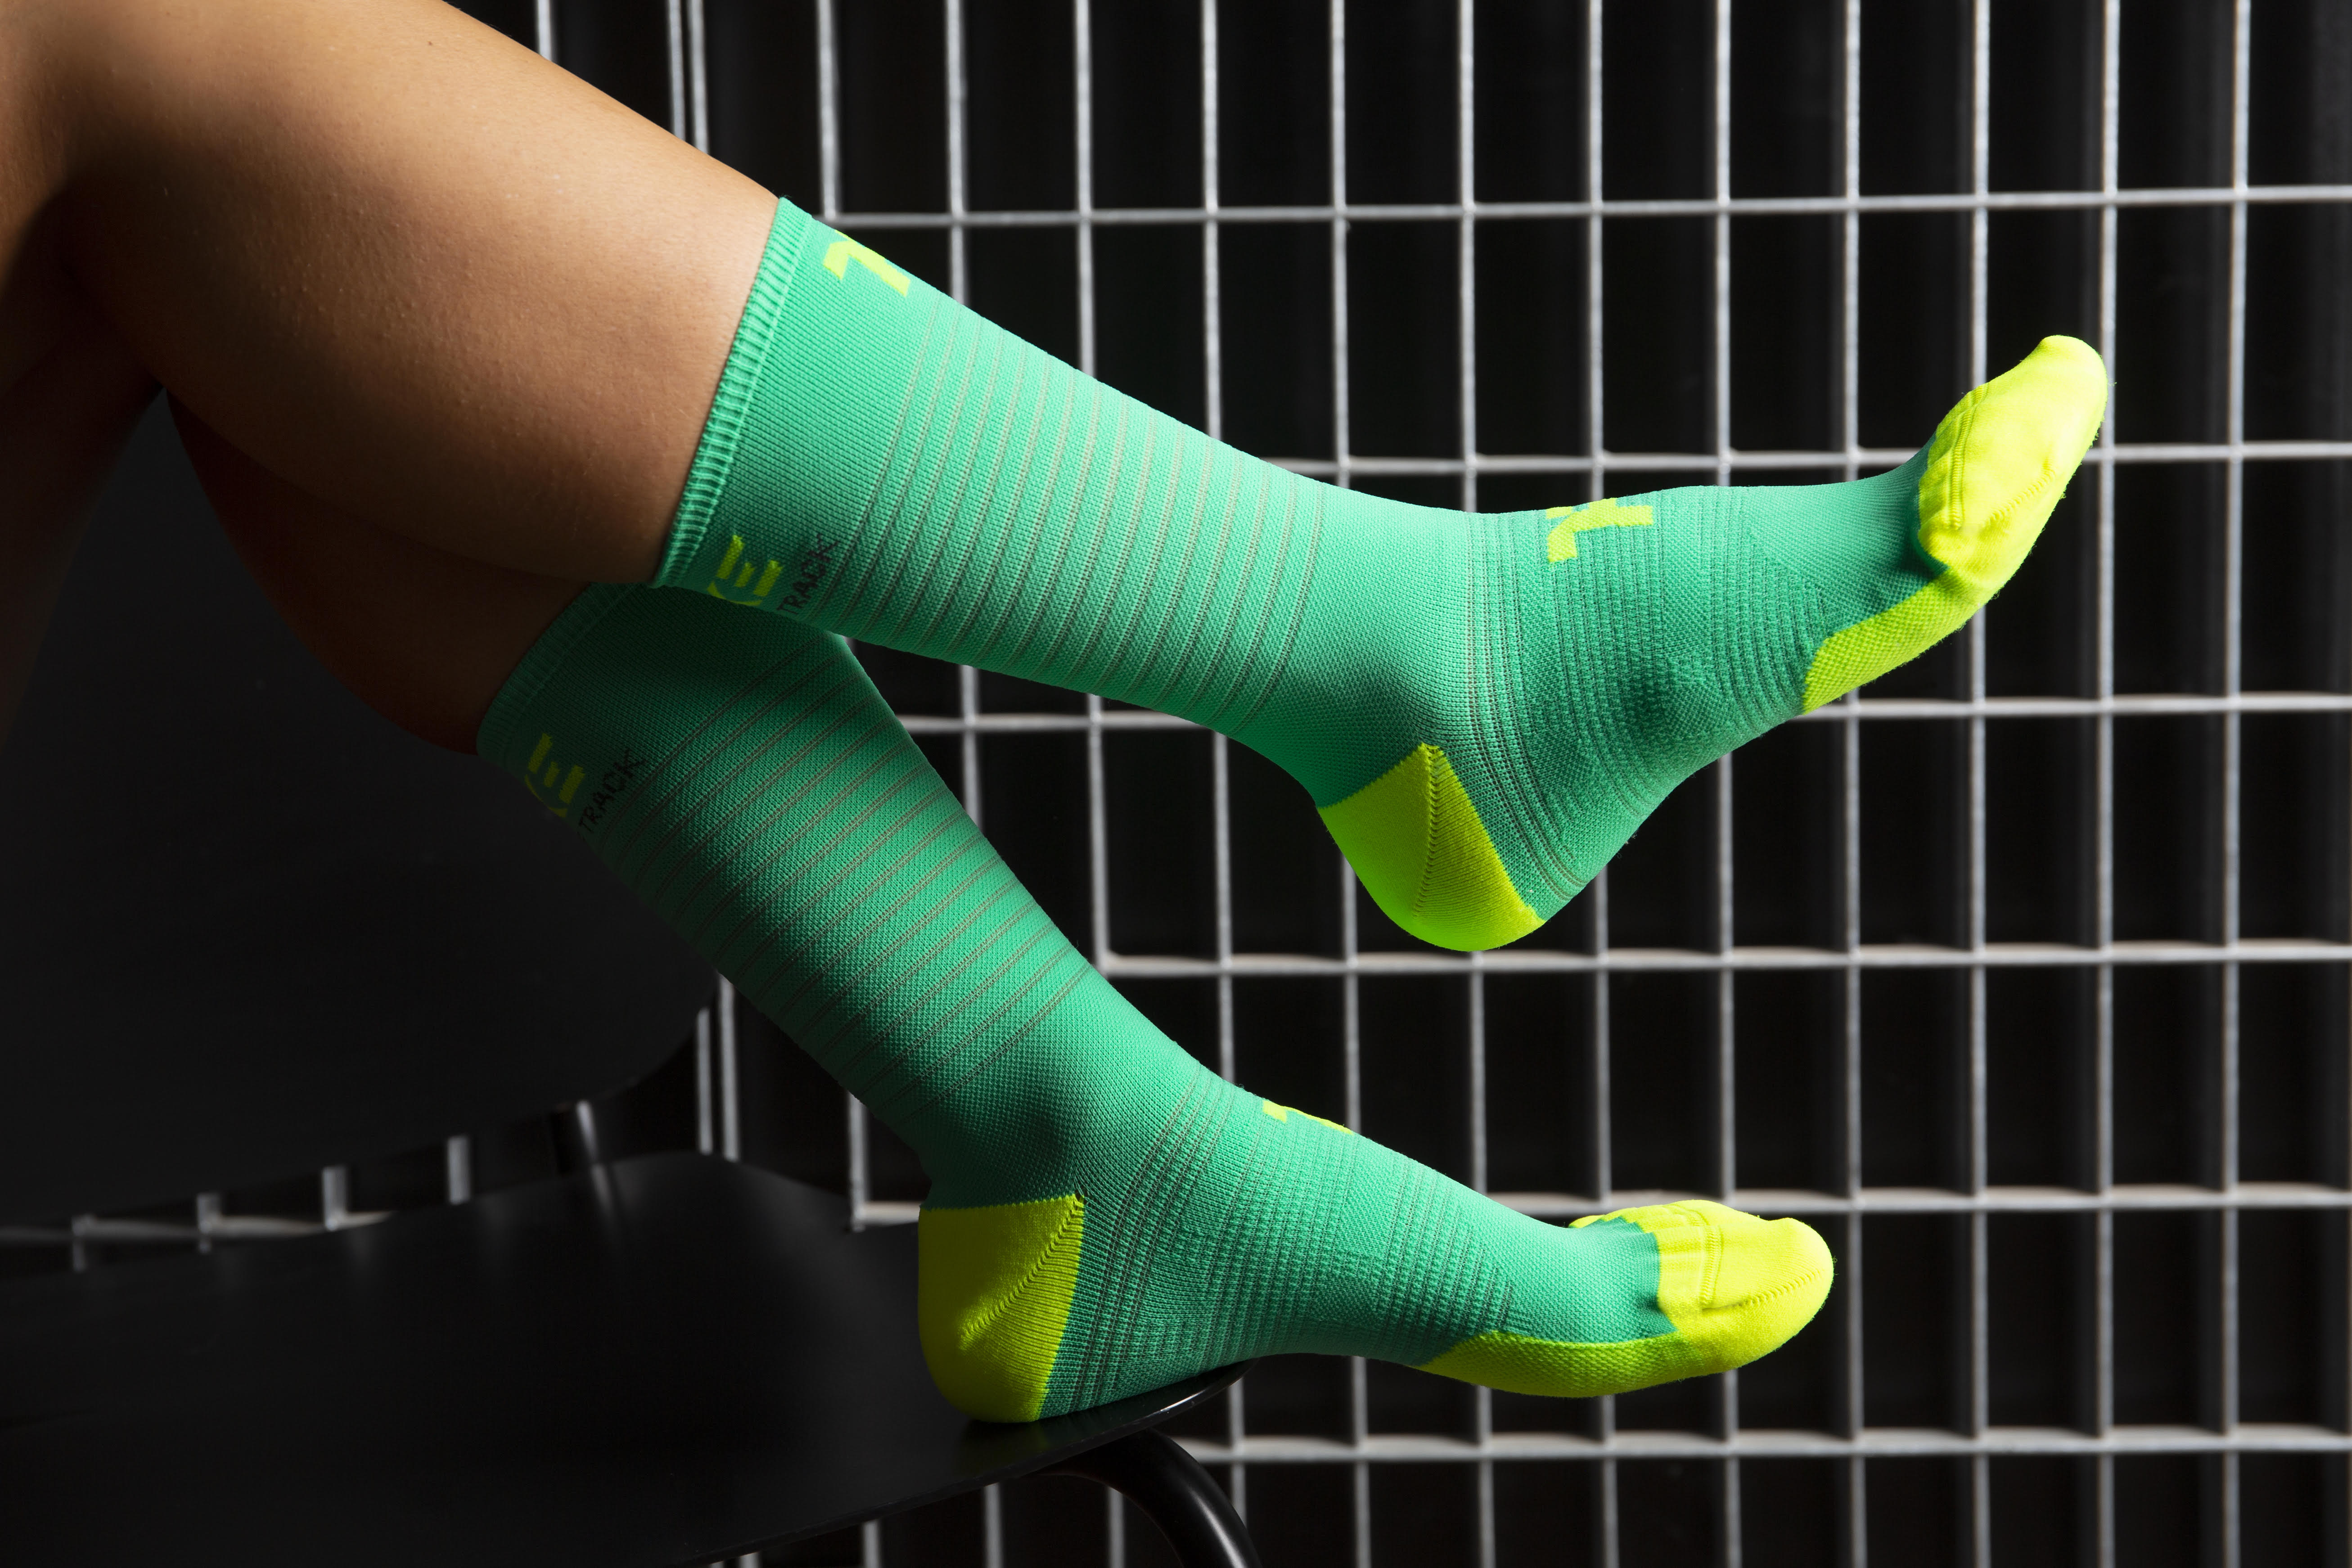 5 benefits of training in high ankle socks with arch compression – EarHugz®